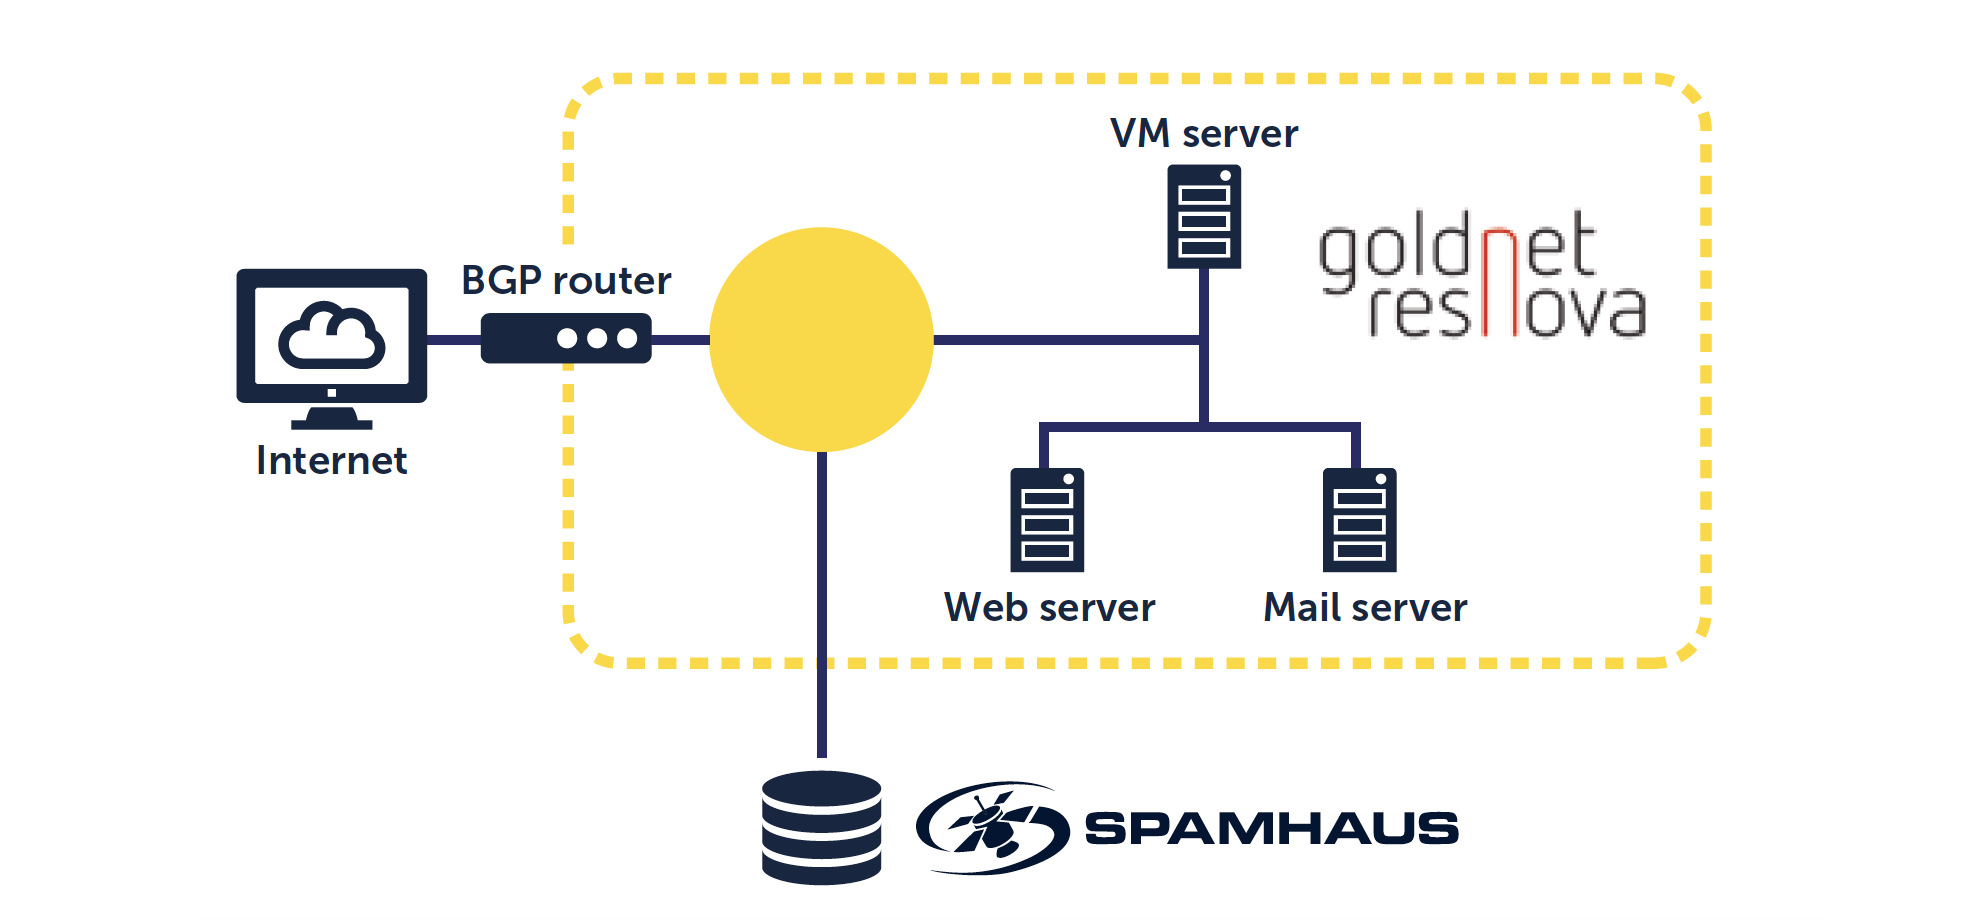 How Goldnet Resnova configured their infrastructure to use Spamhaus BGP feeds to gain additional protection.